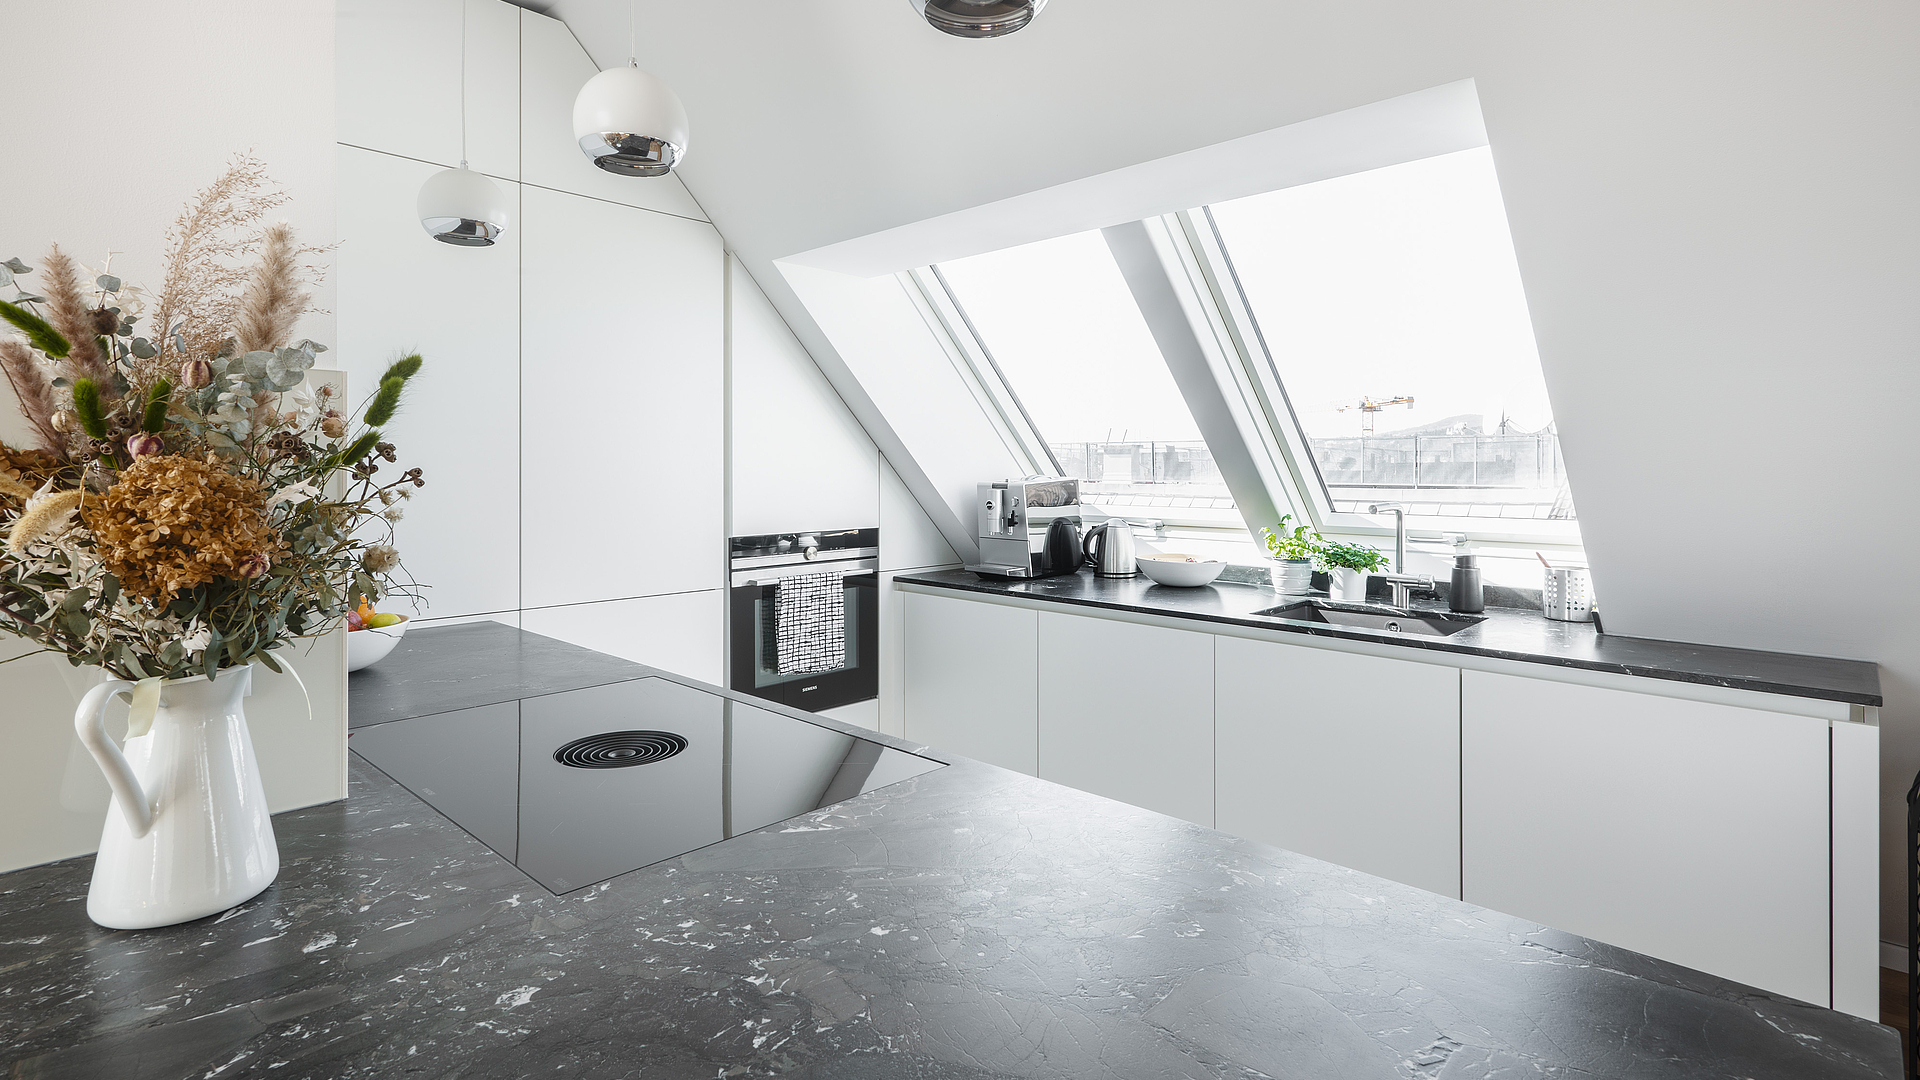 Angles of opportunity: kitchens with sloped ceilings